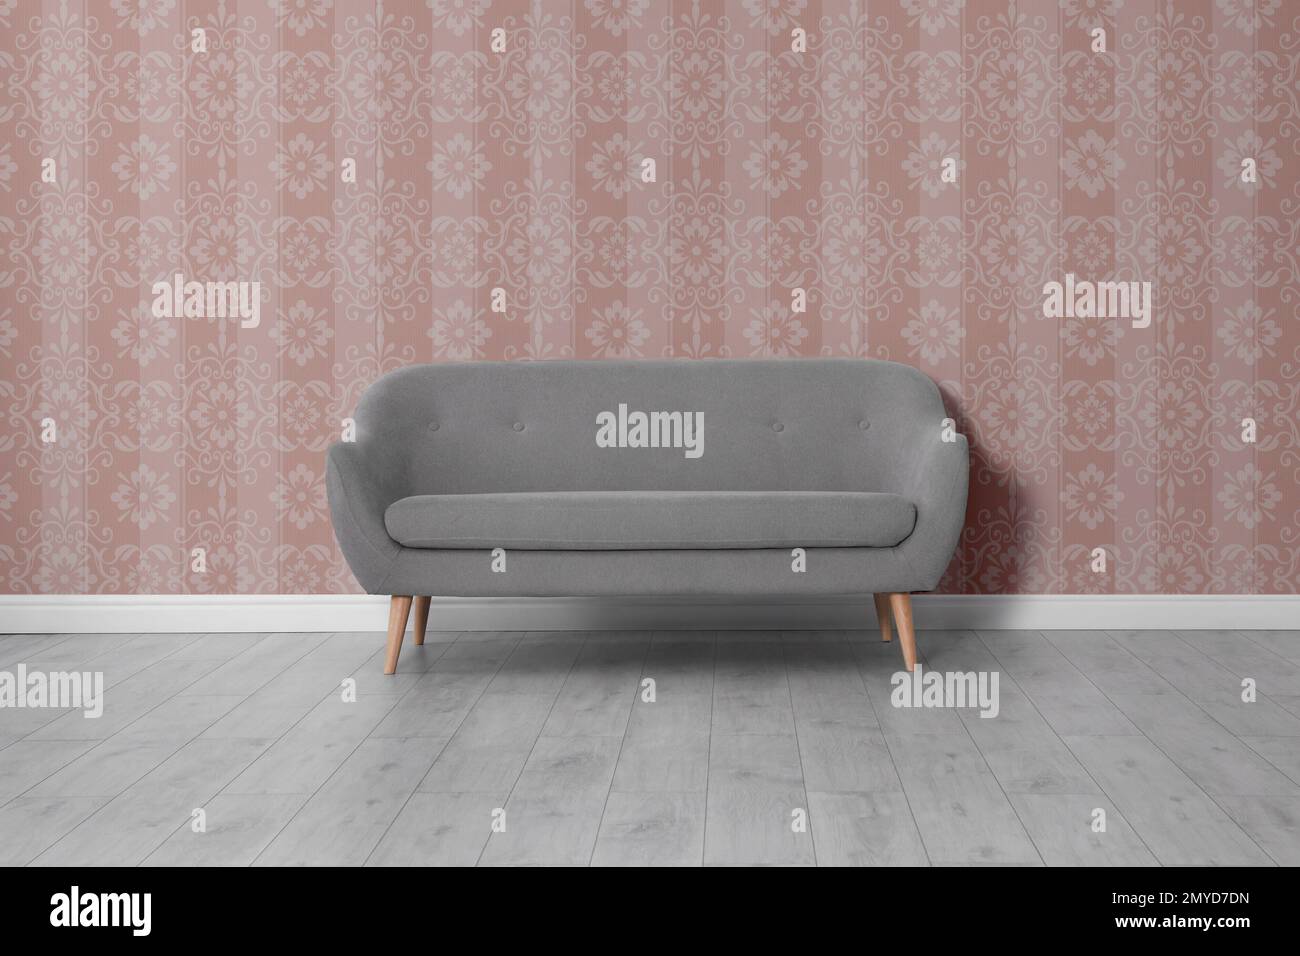 Modern sofa near patterned wallpapers. Interior design Stock Photo